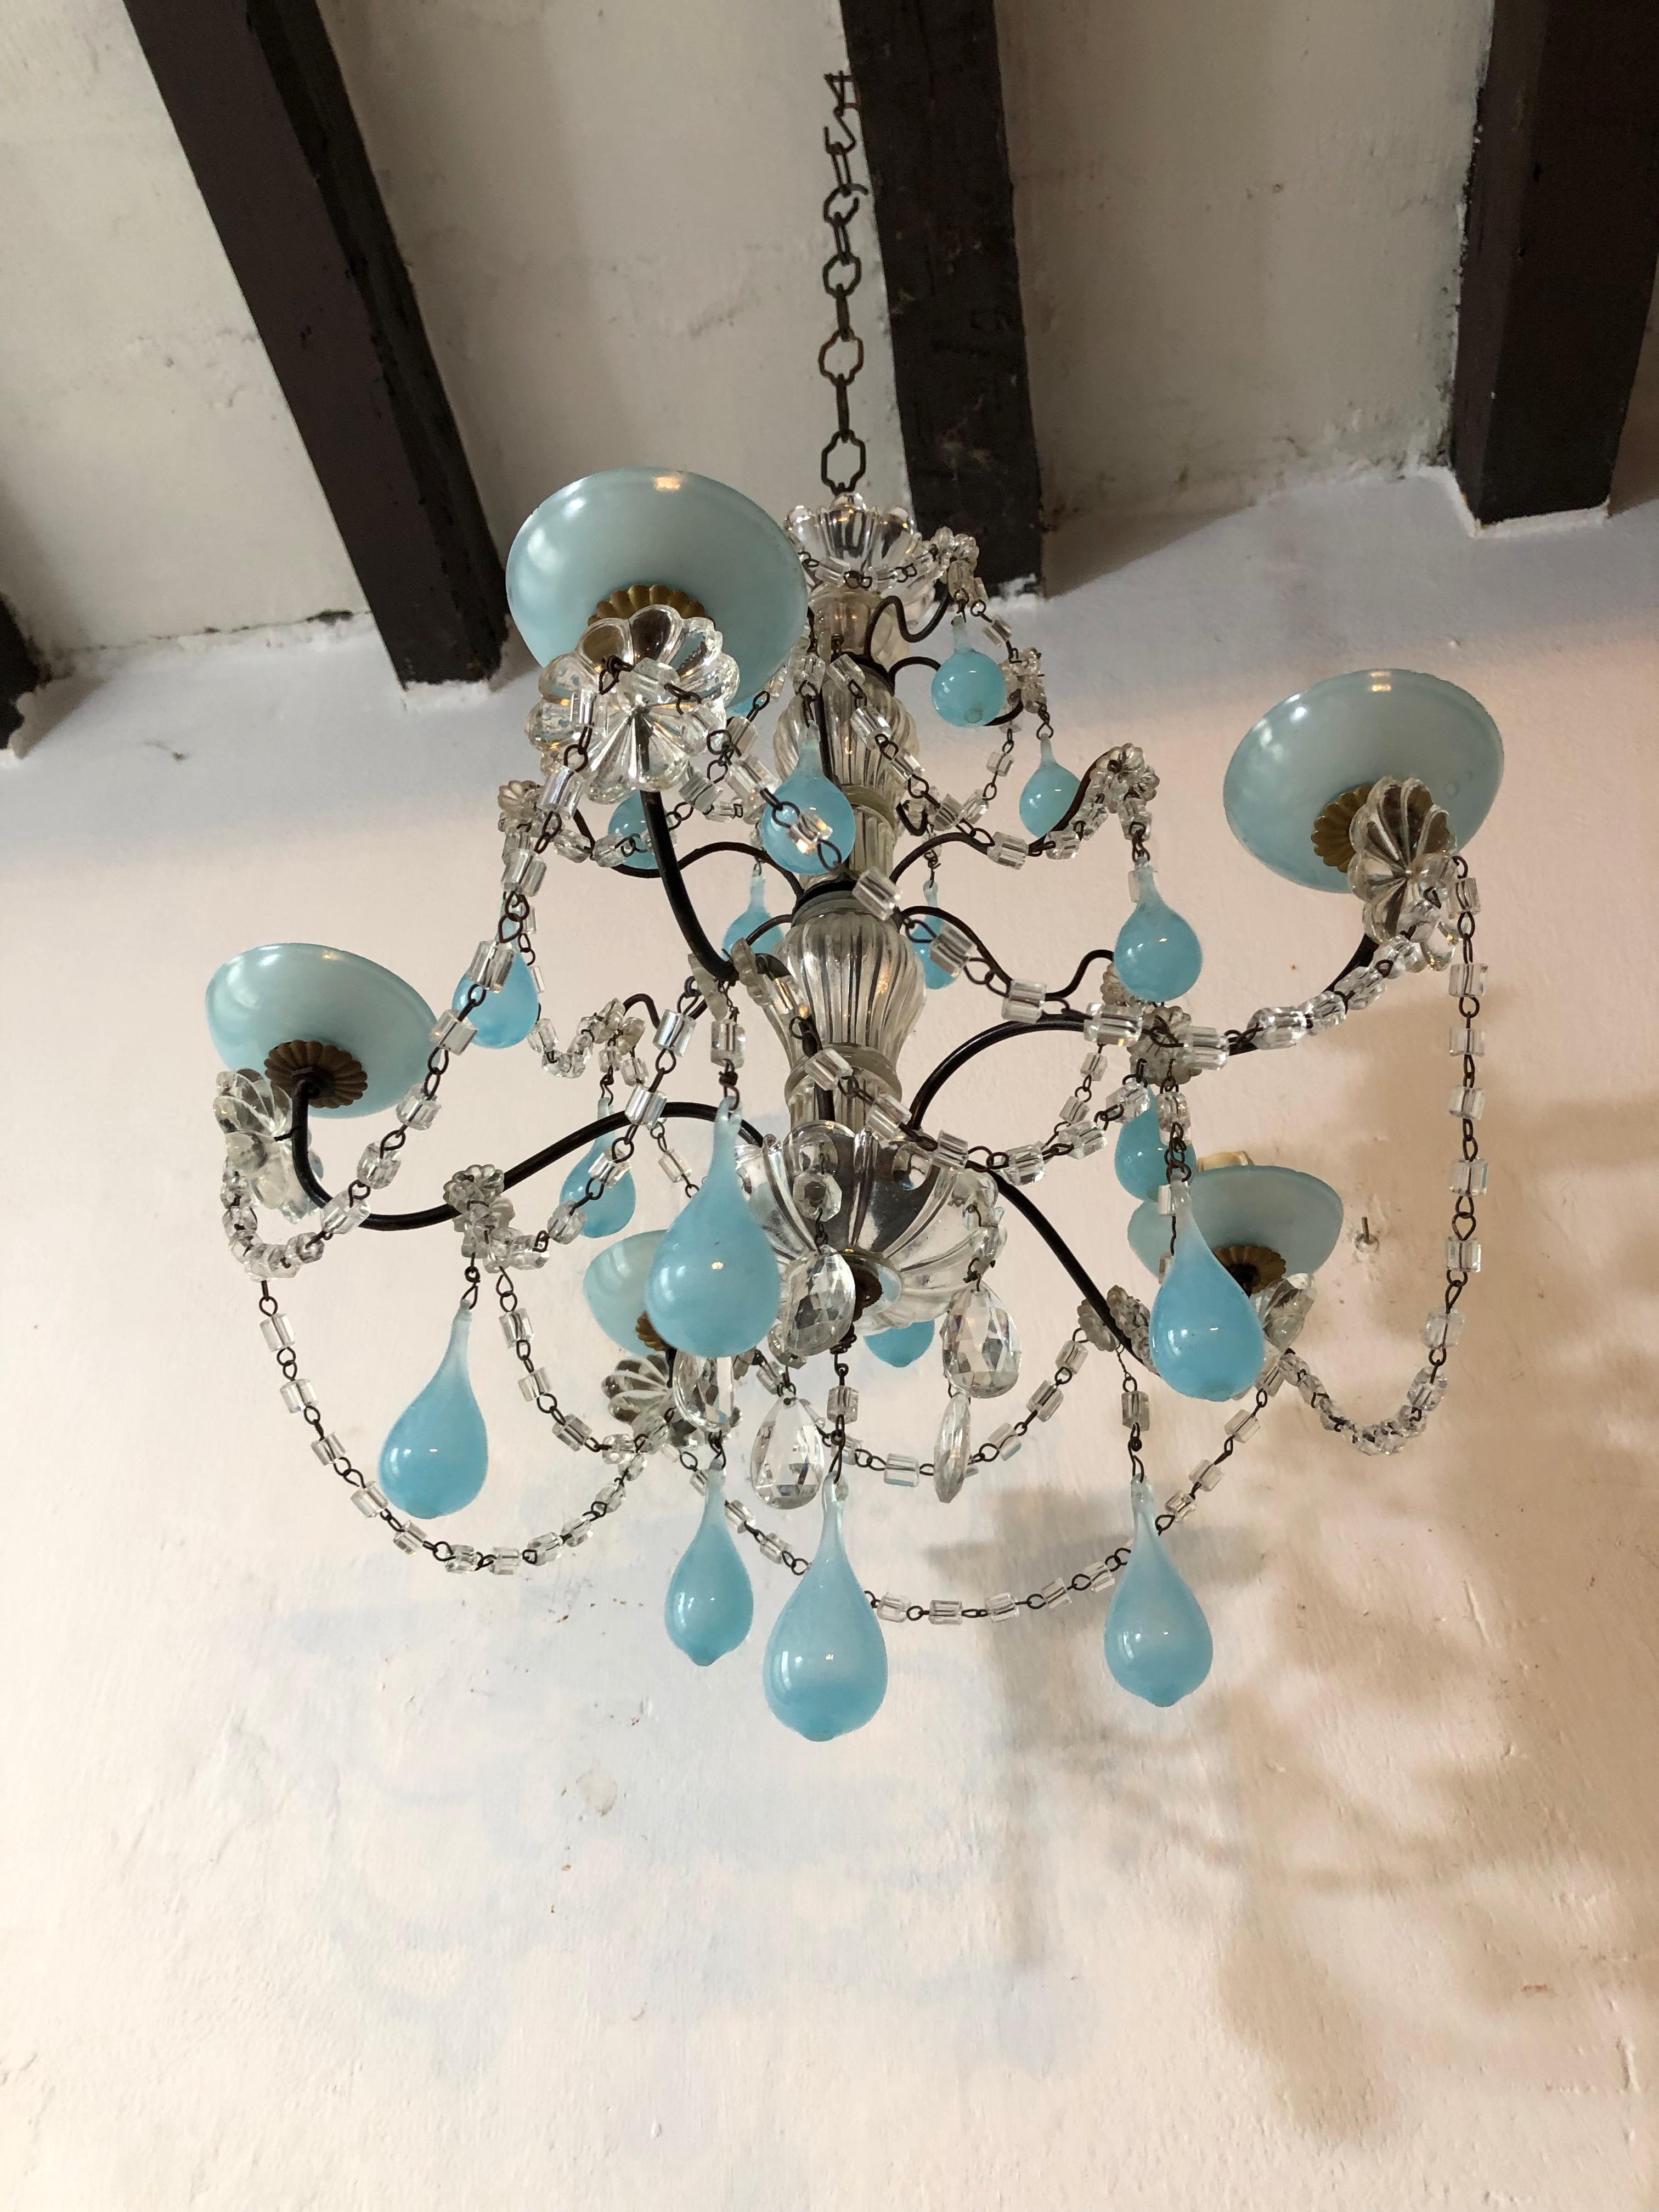 French Aqua Blue Opaline Murano Drops and Bobeches Chandelier 1